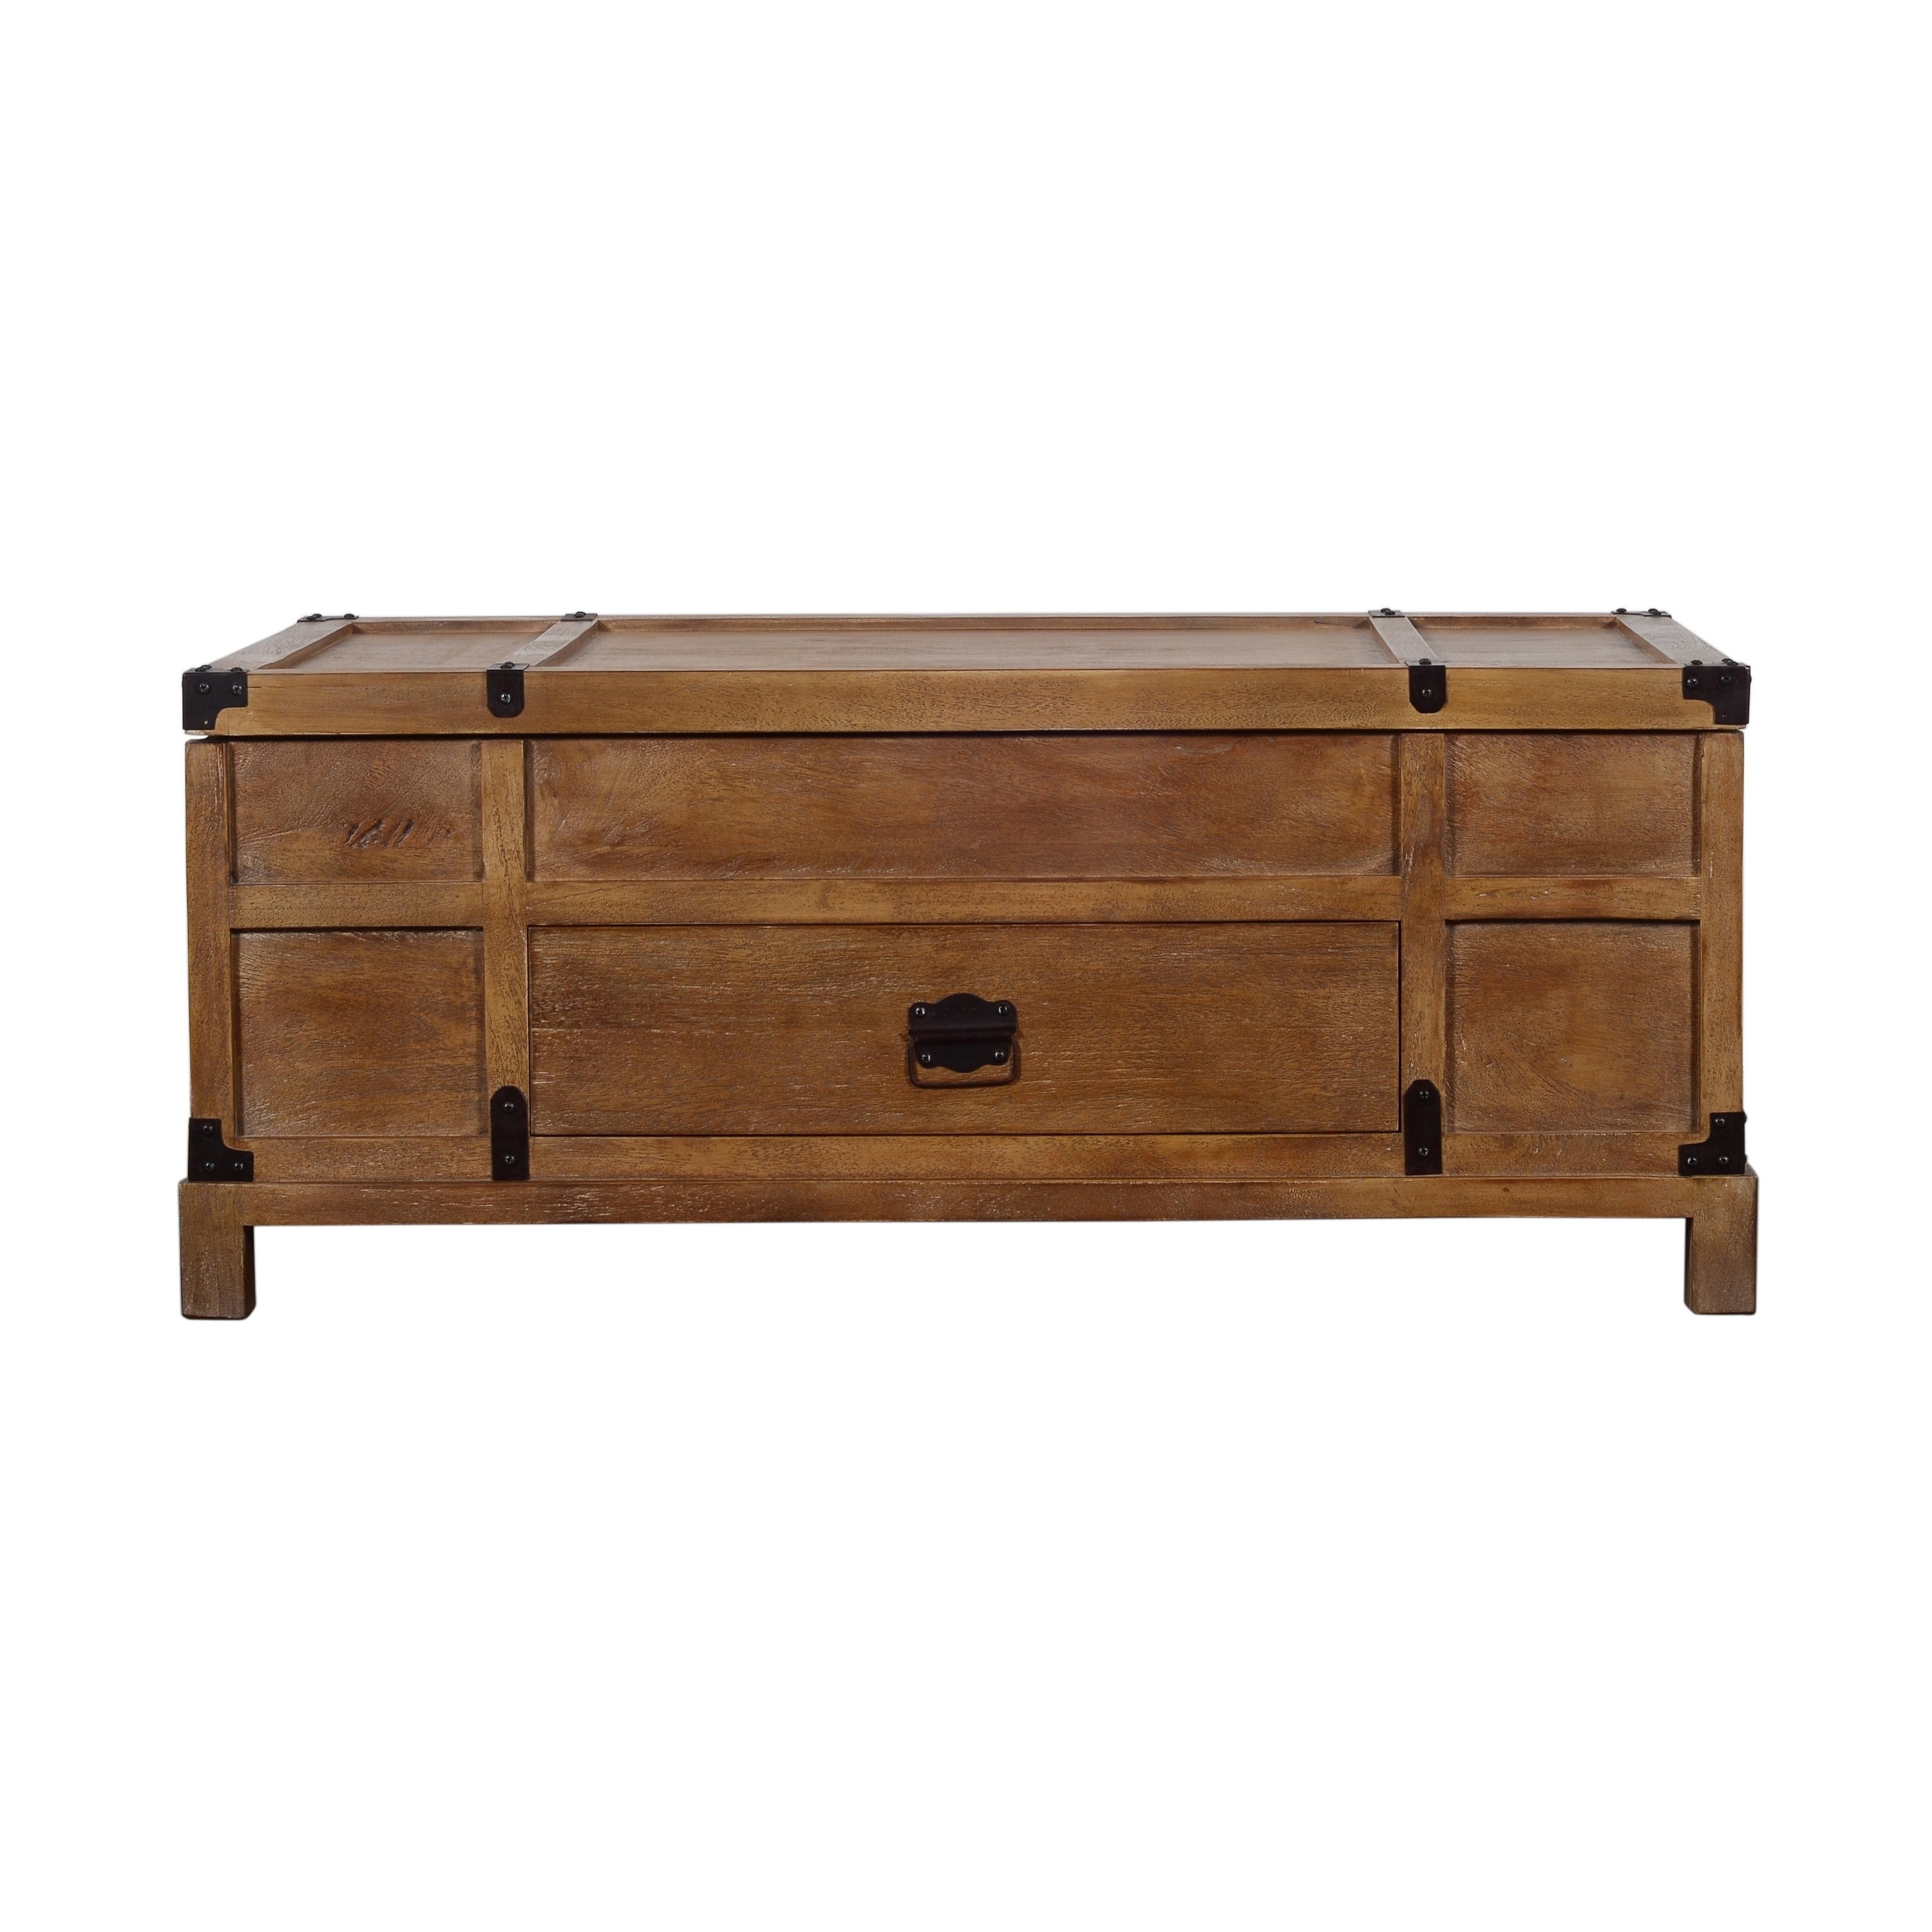 Rustic Single Drawer Mango Wood Coffee Table With Lift Top Storage & Compartments, Brown - Saltoro Sherpi